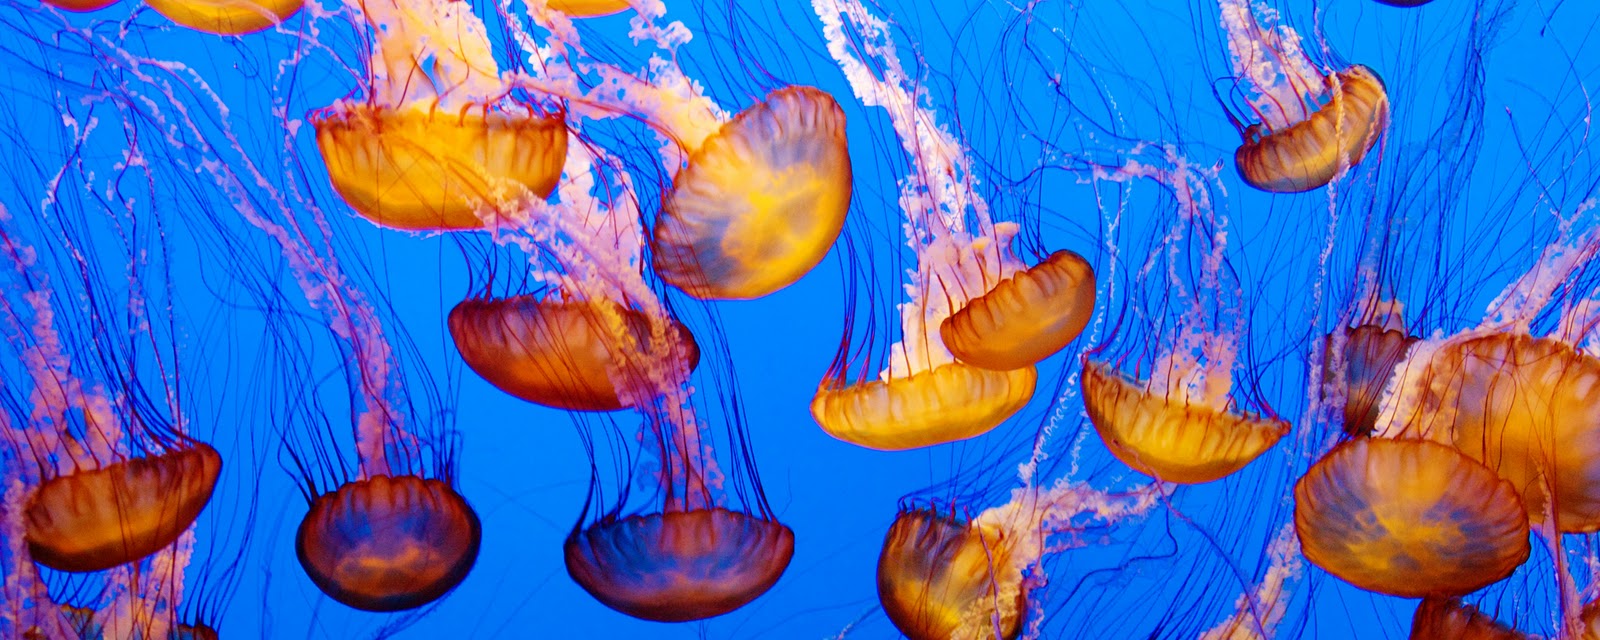 Giant Jellyfish Huge Image Gallery Jelly Fish Landscapes And